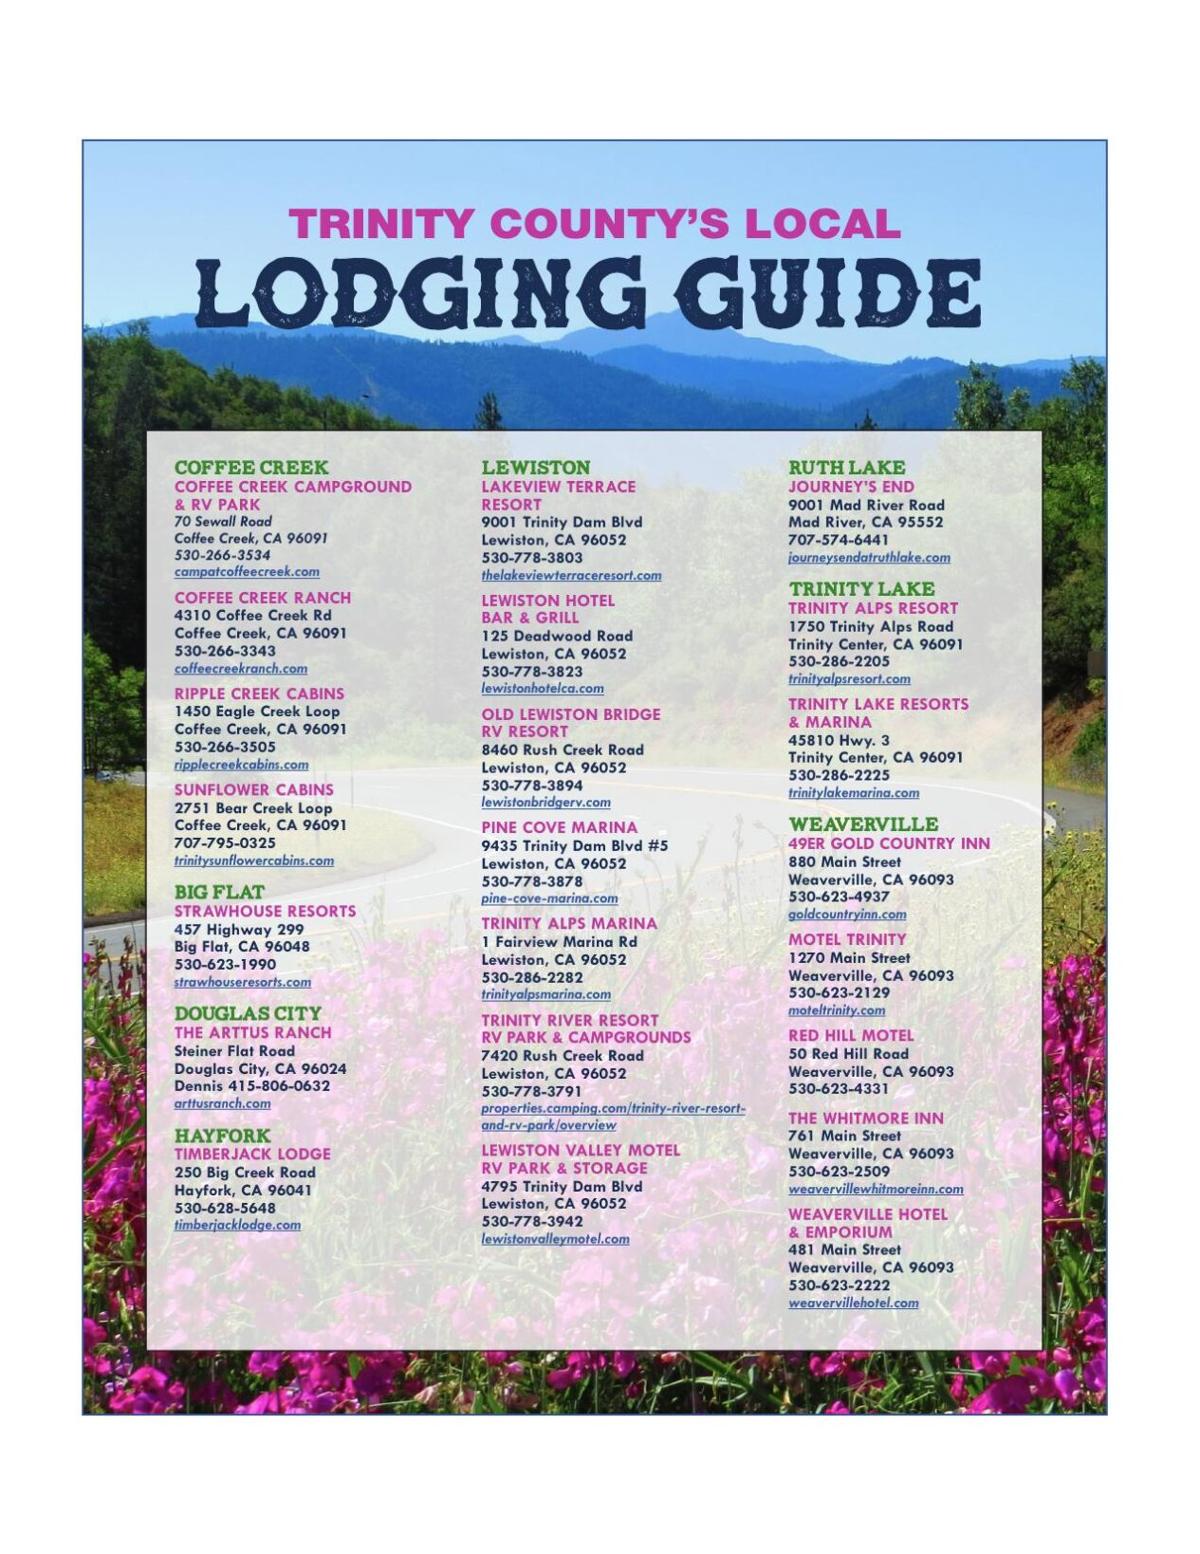 Lodging Guide